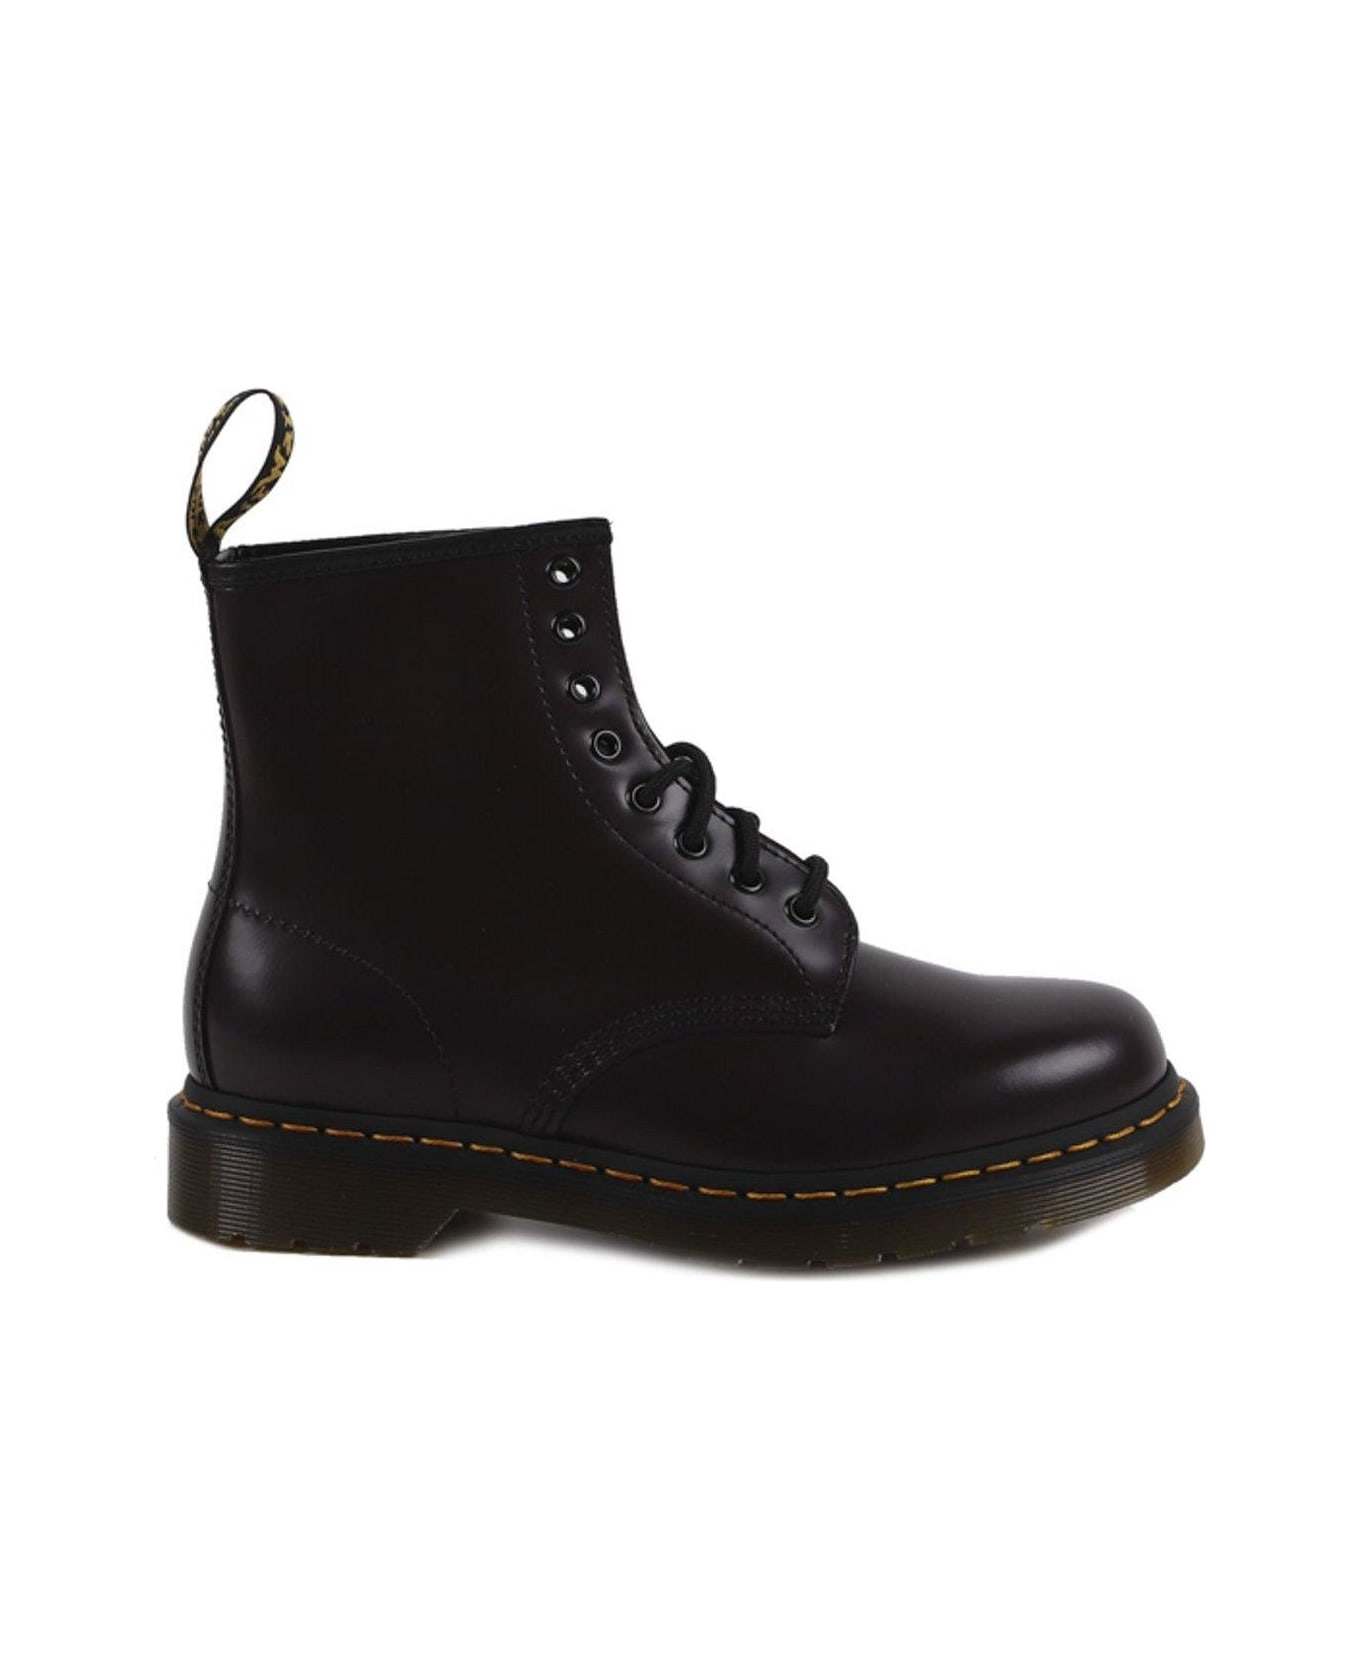 Dr. Martens 1460 Round Toe Lace-up Boots - Burgundy